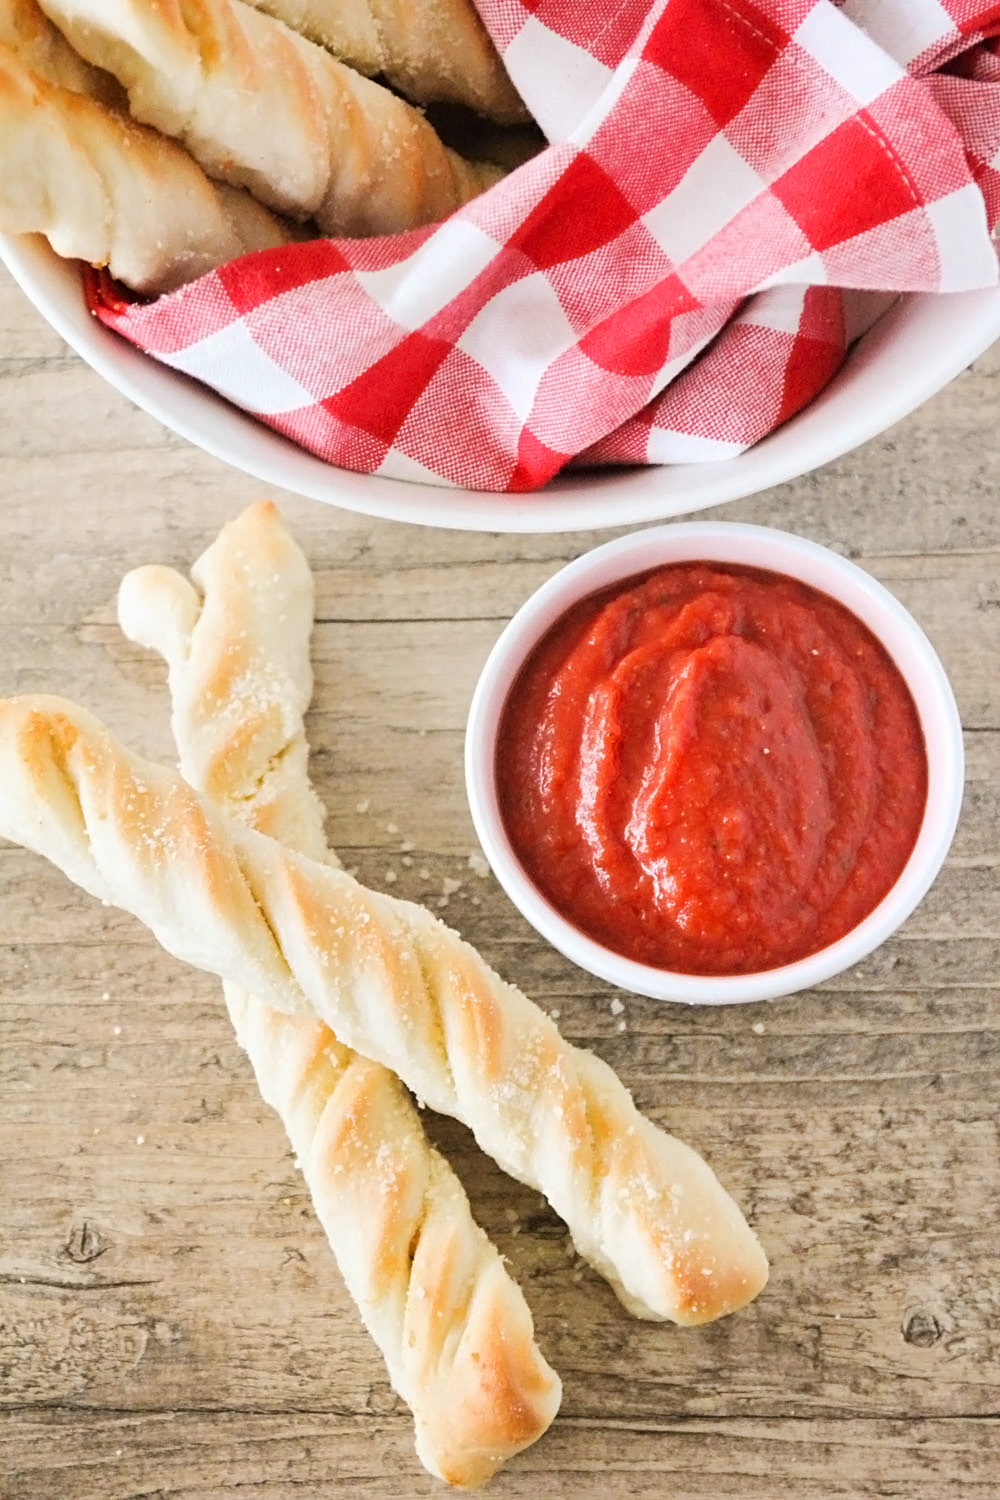 These garlic parmesan breadsticks are addictingly delicious, and ready in under 45 minutes!